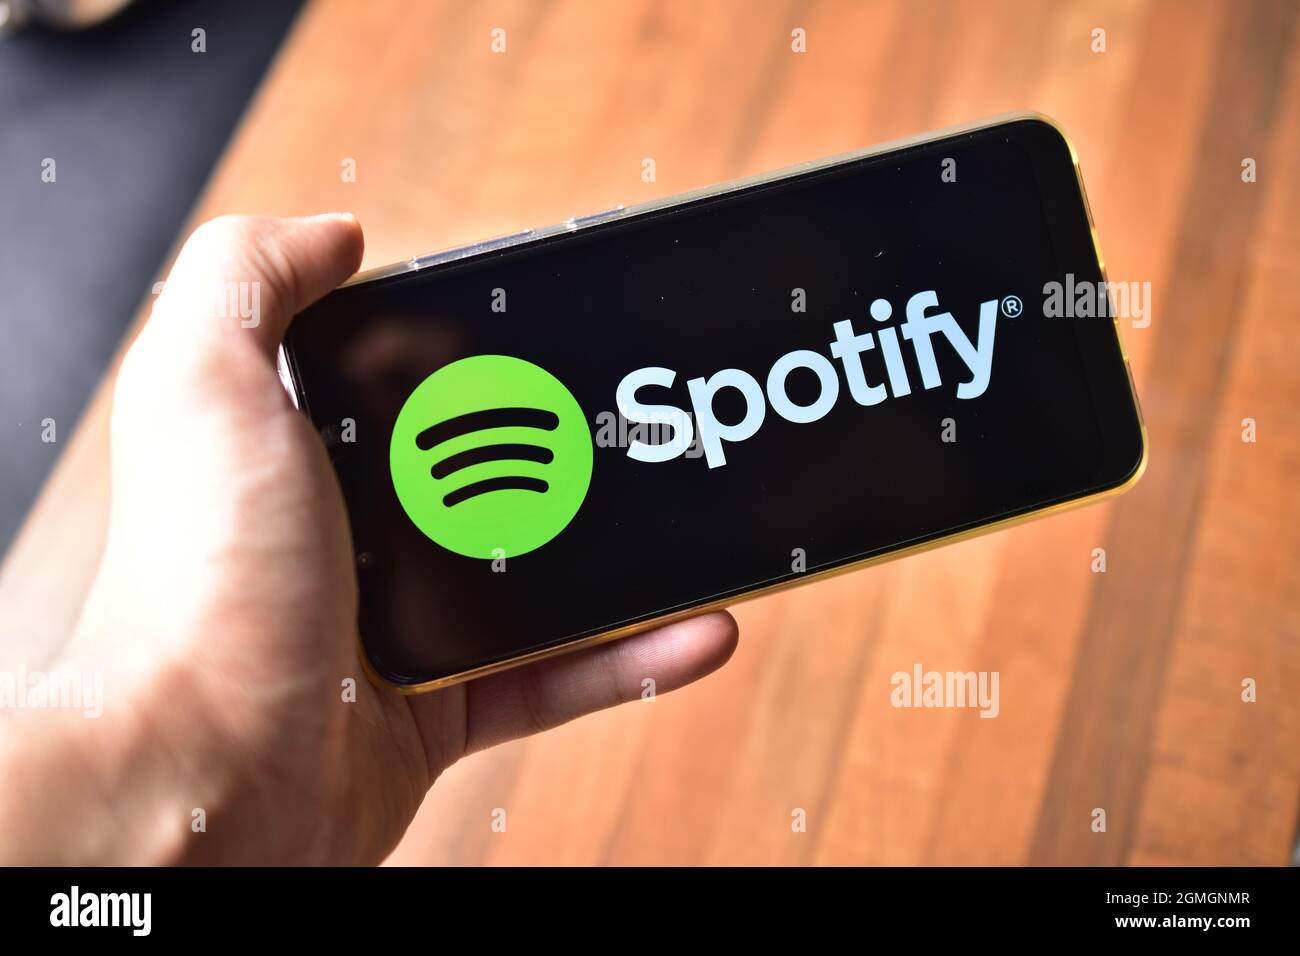 Delhi, India, October 23, 2019: hand holding smartphone and using Spotify app, music podcast application, Swedish application Stock Photo